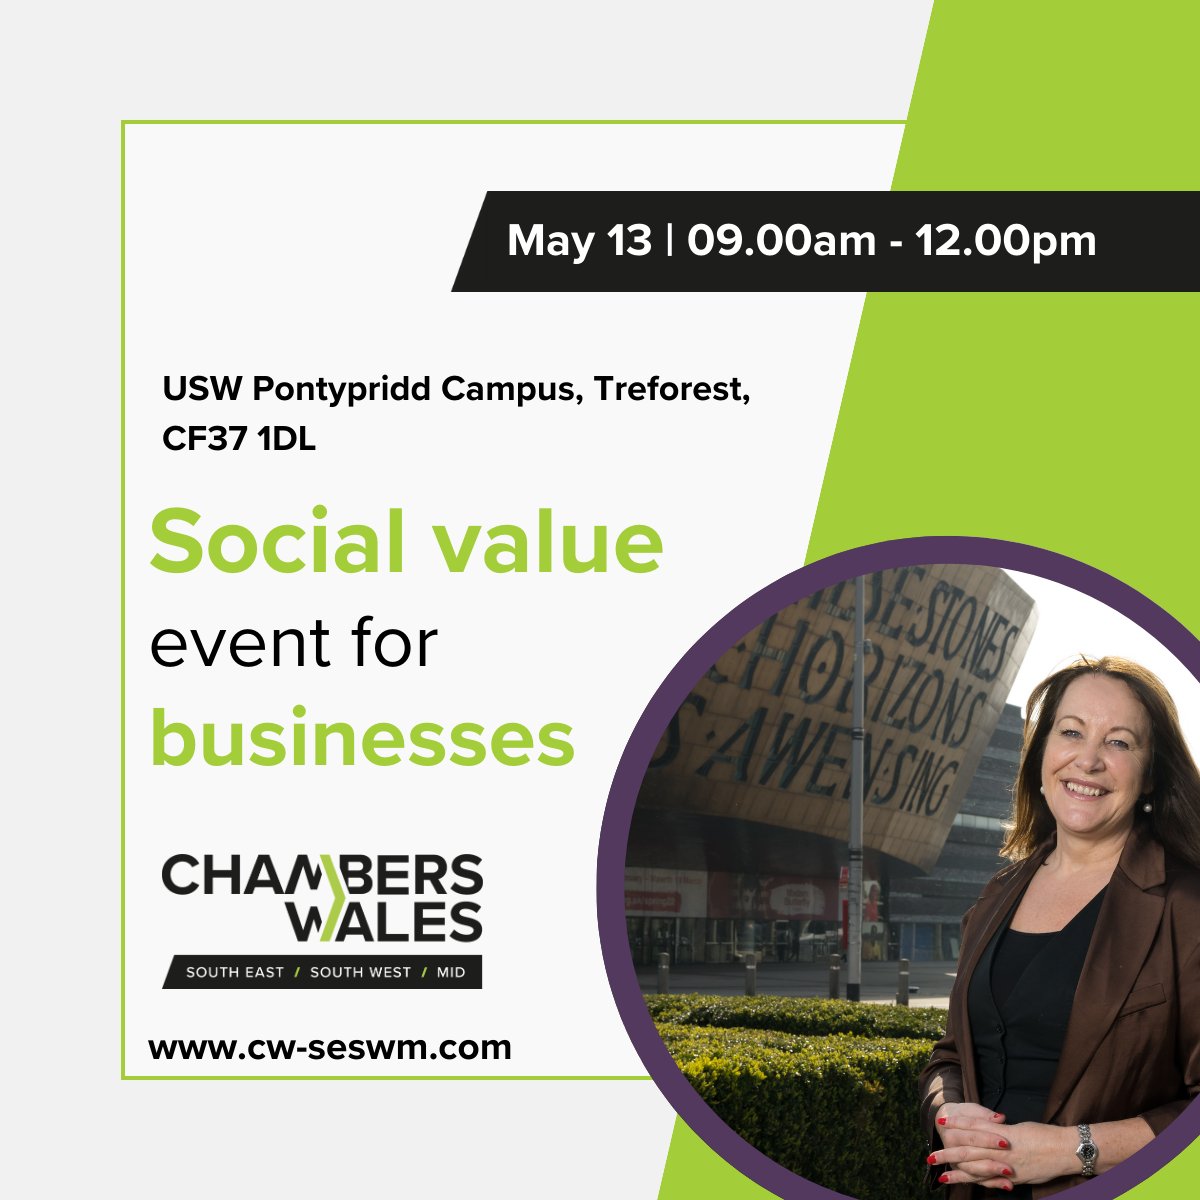 We’re excited to have Jen Pemberton, CEO of @ANTZUKLTD, speaking at our Social Value event on 13 May with @USW Exchange. Don’t miss out! eventbrite.co.uk/e/the-importan…